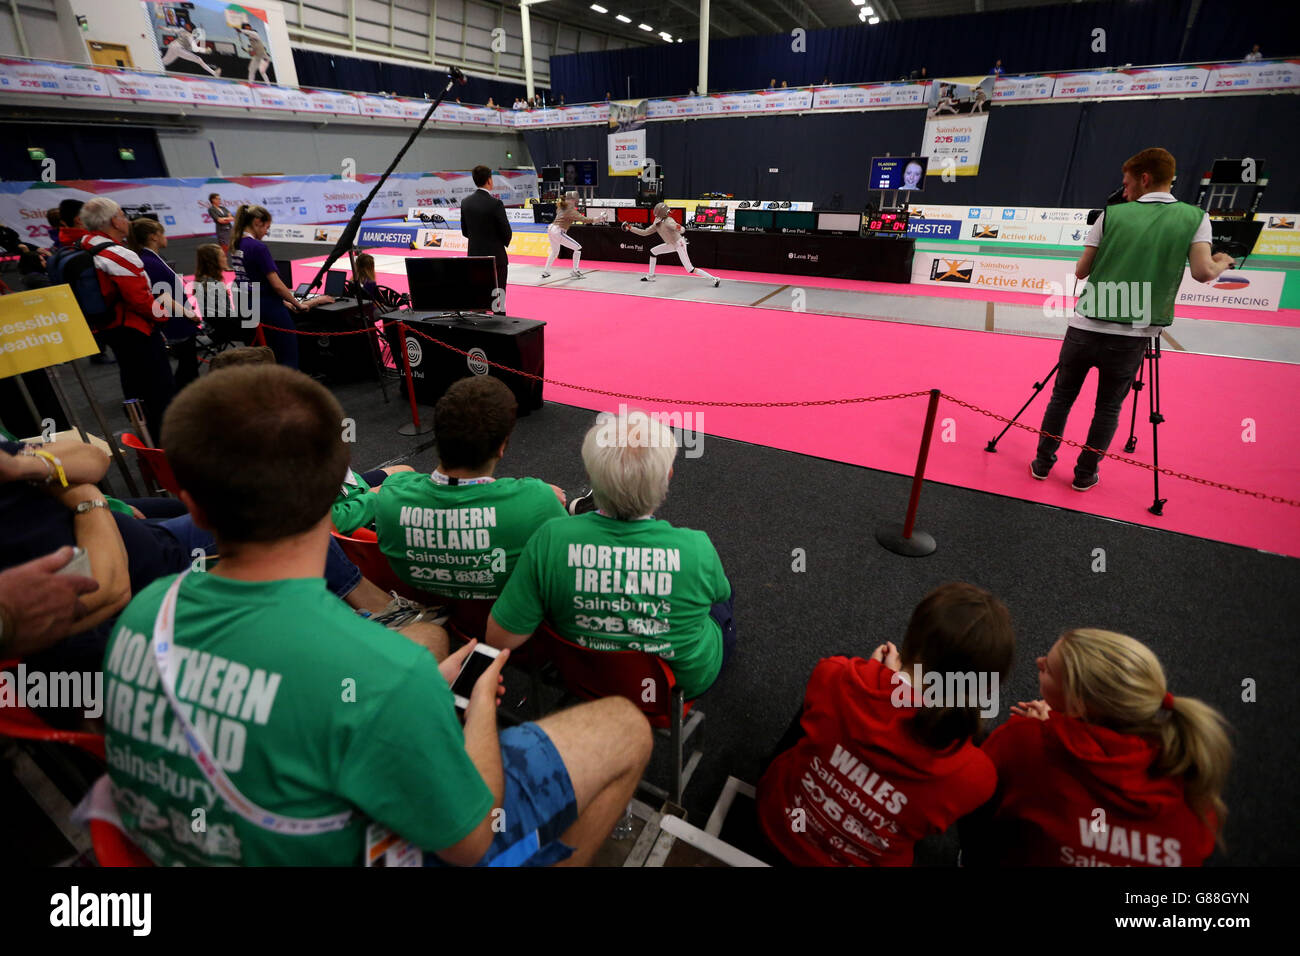 A general view of spectators watching Scotland's Jessica Corby and England's Laura Gladdish in the Women's Sabre Final at the Fencing during the Sainsbury's 2015 School Games in Manchester. PRESS ASSOCIATION Photo. Picture date: Saturday September 5, 2015. Photo credit should read: Steven Paston/PA Wire Stock Photo